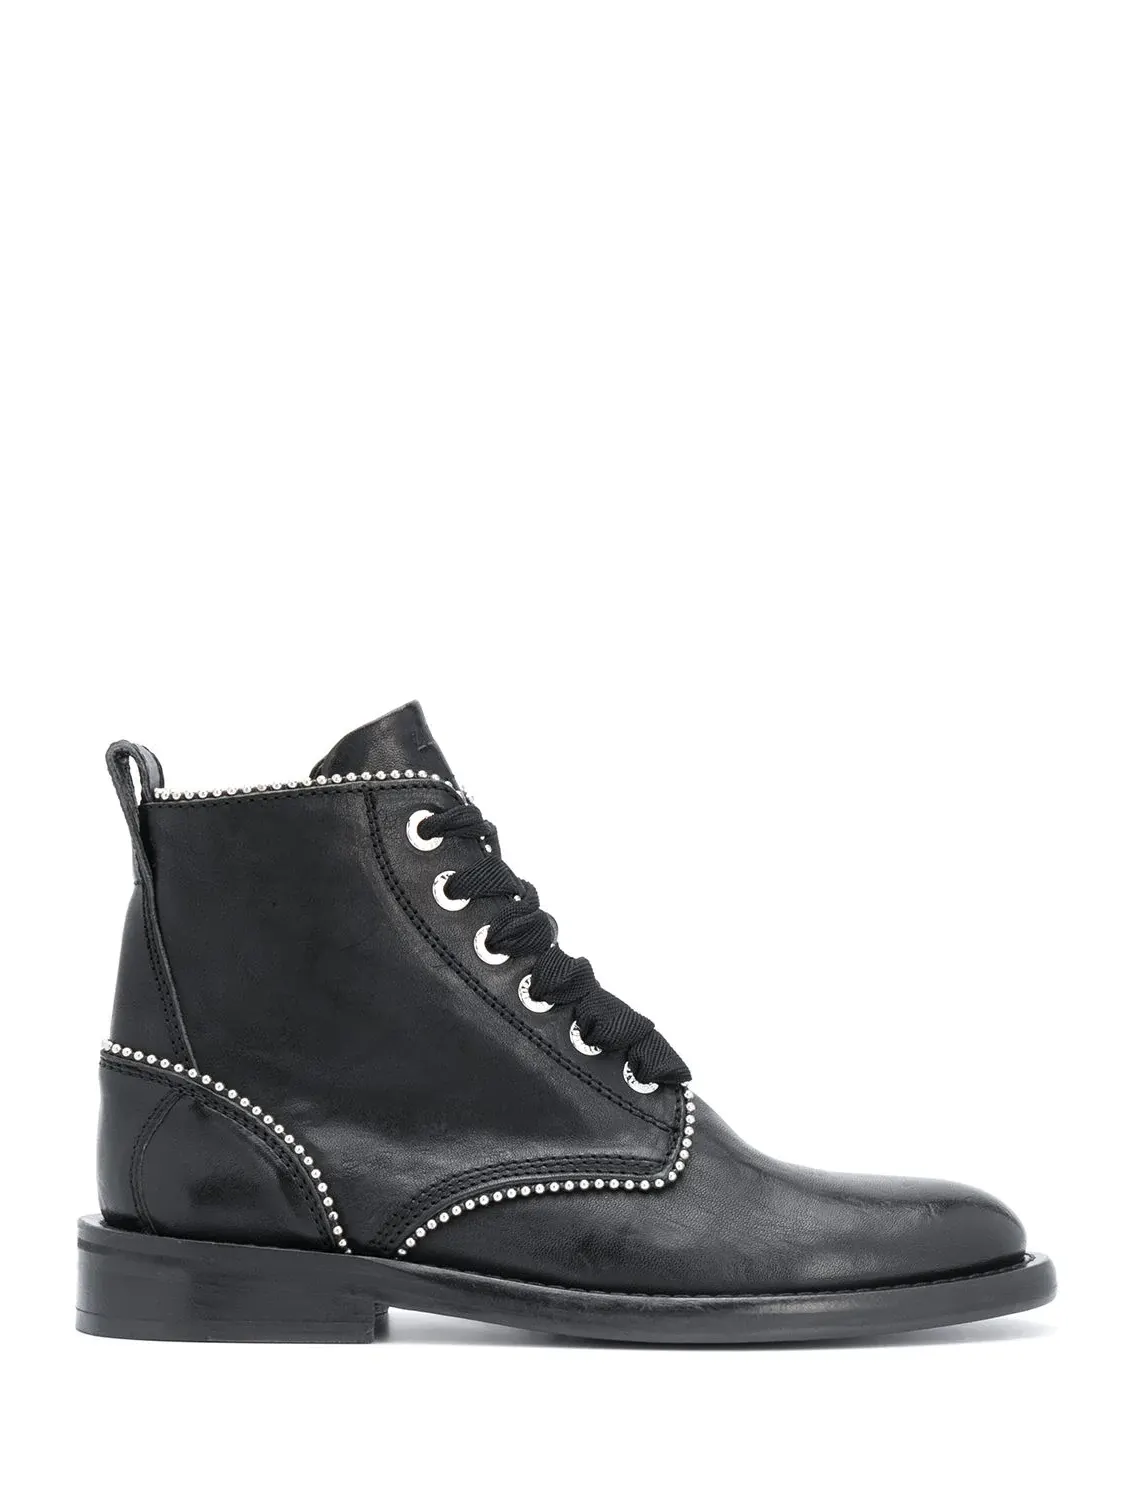 LAUREEN ROMA + STUDS PIPPING boots, black